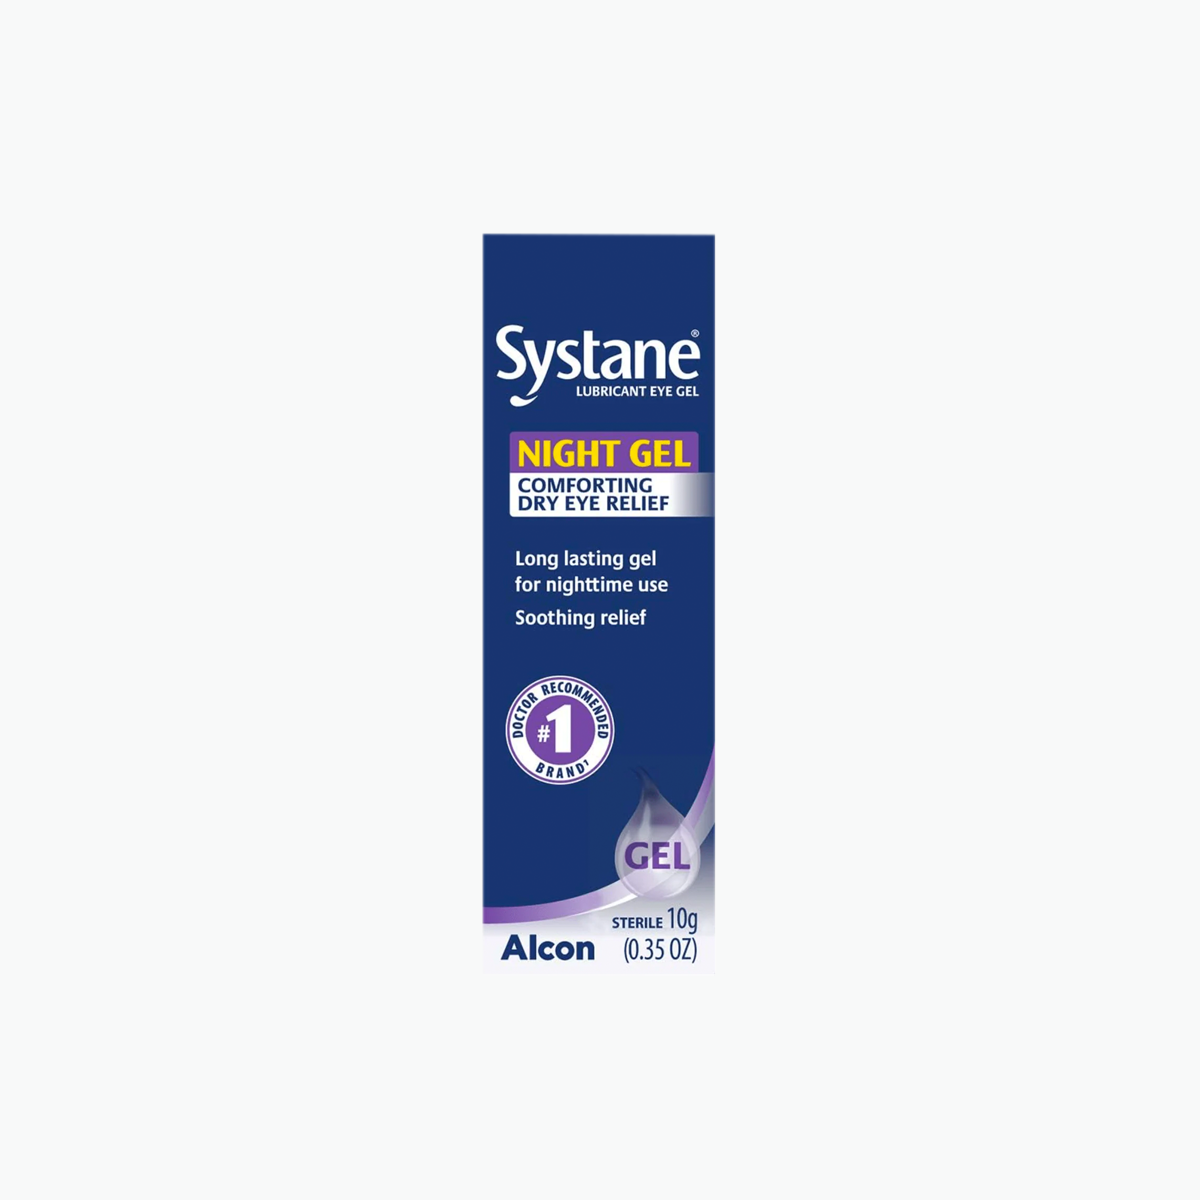 Systane Night Gel for Comforting Dry Eye Relief at Nighttime (10g / .35oz)